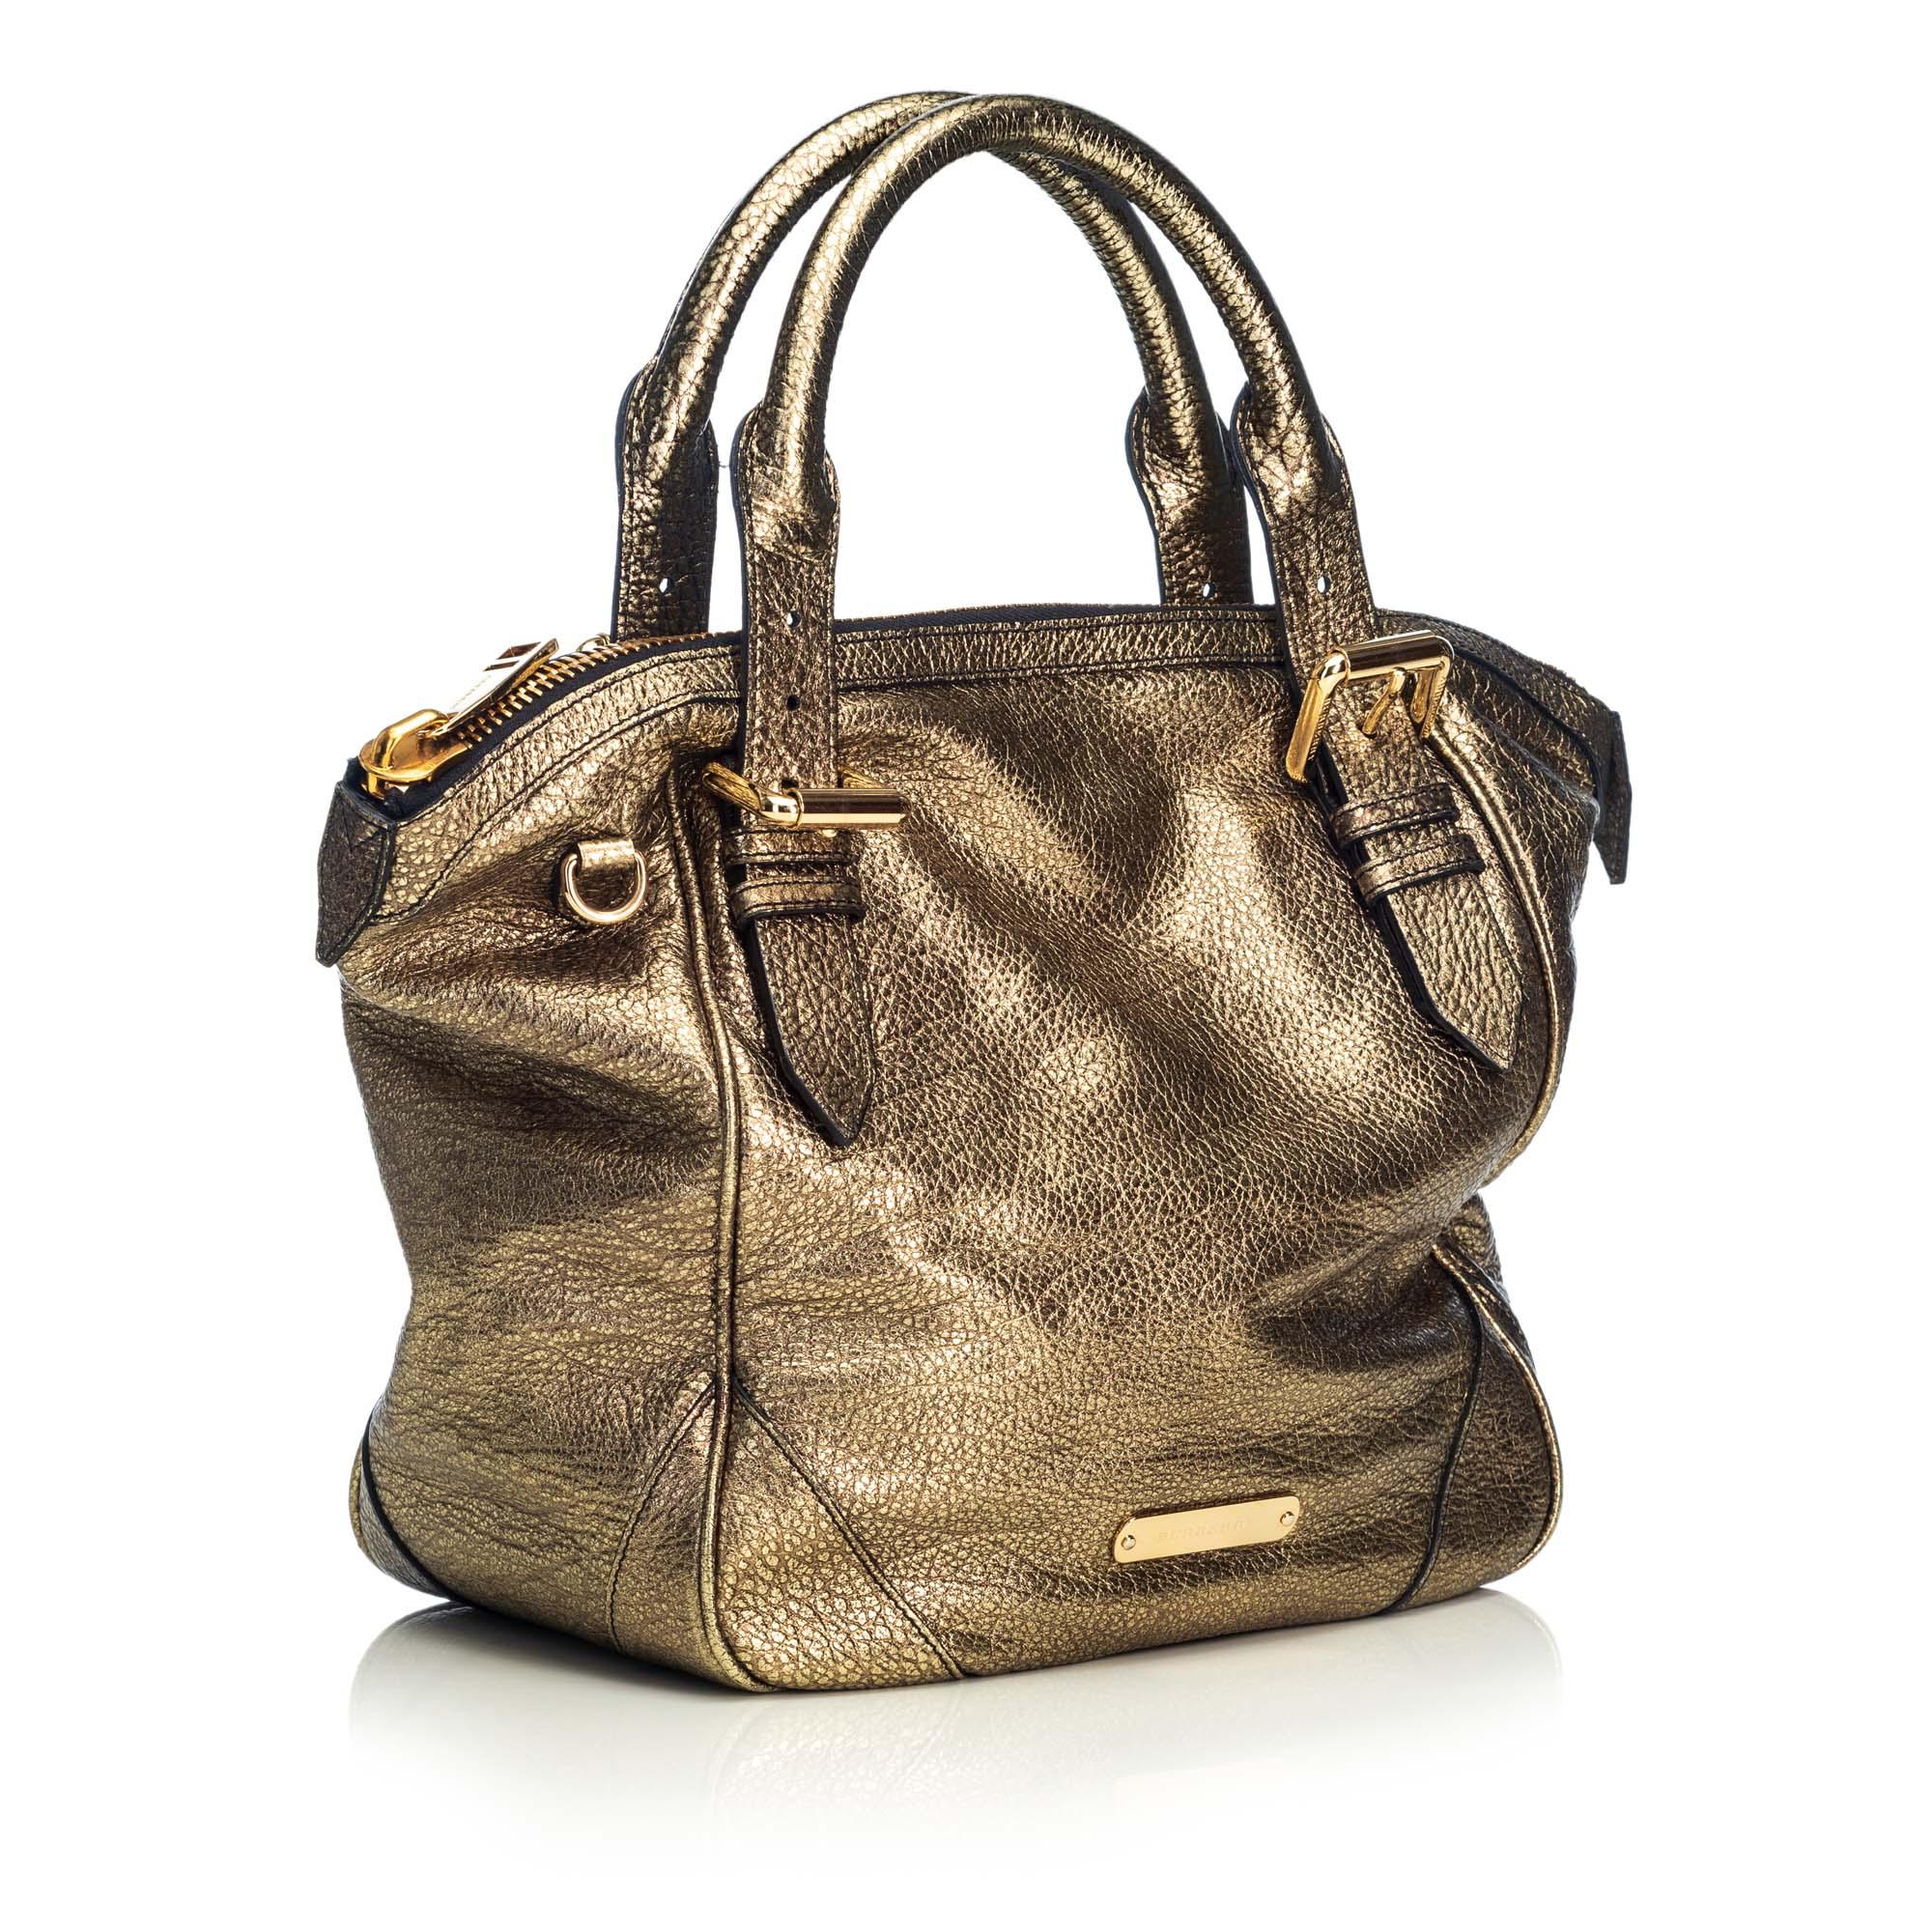 This satchel features a metallic leather body, a rolled leather handle, a detachable leather strap, a top zip closure, and an interior zip pocket. It carries as AB condition rating.

Inclusions: 
Dust Bag
Dimensions:
Length: 42.00 cm
Width: 31.00